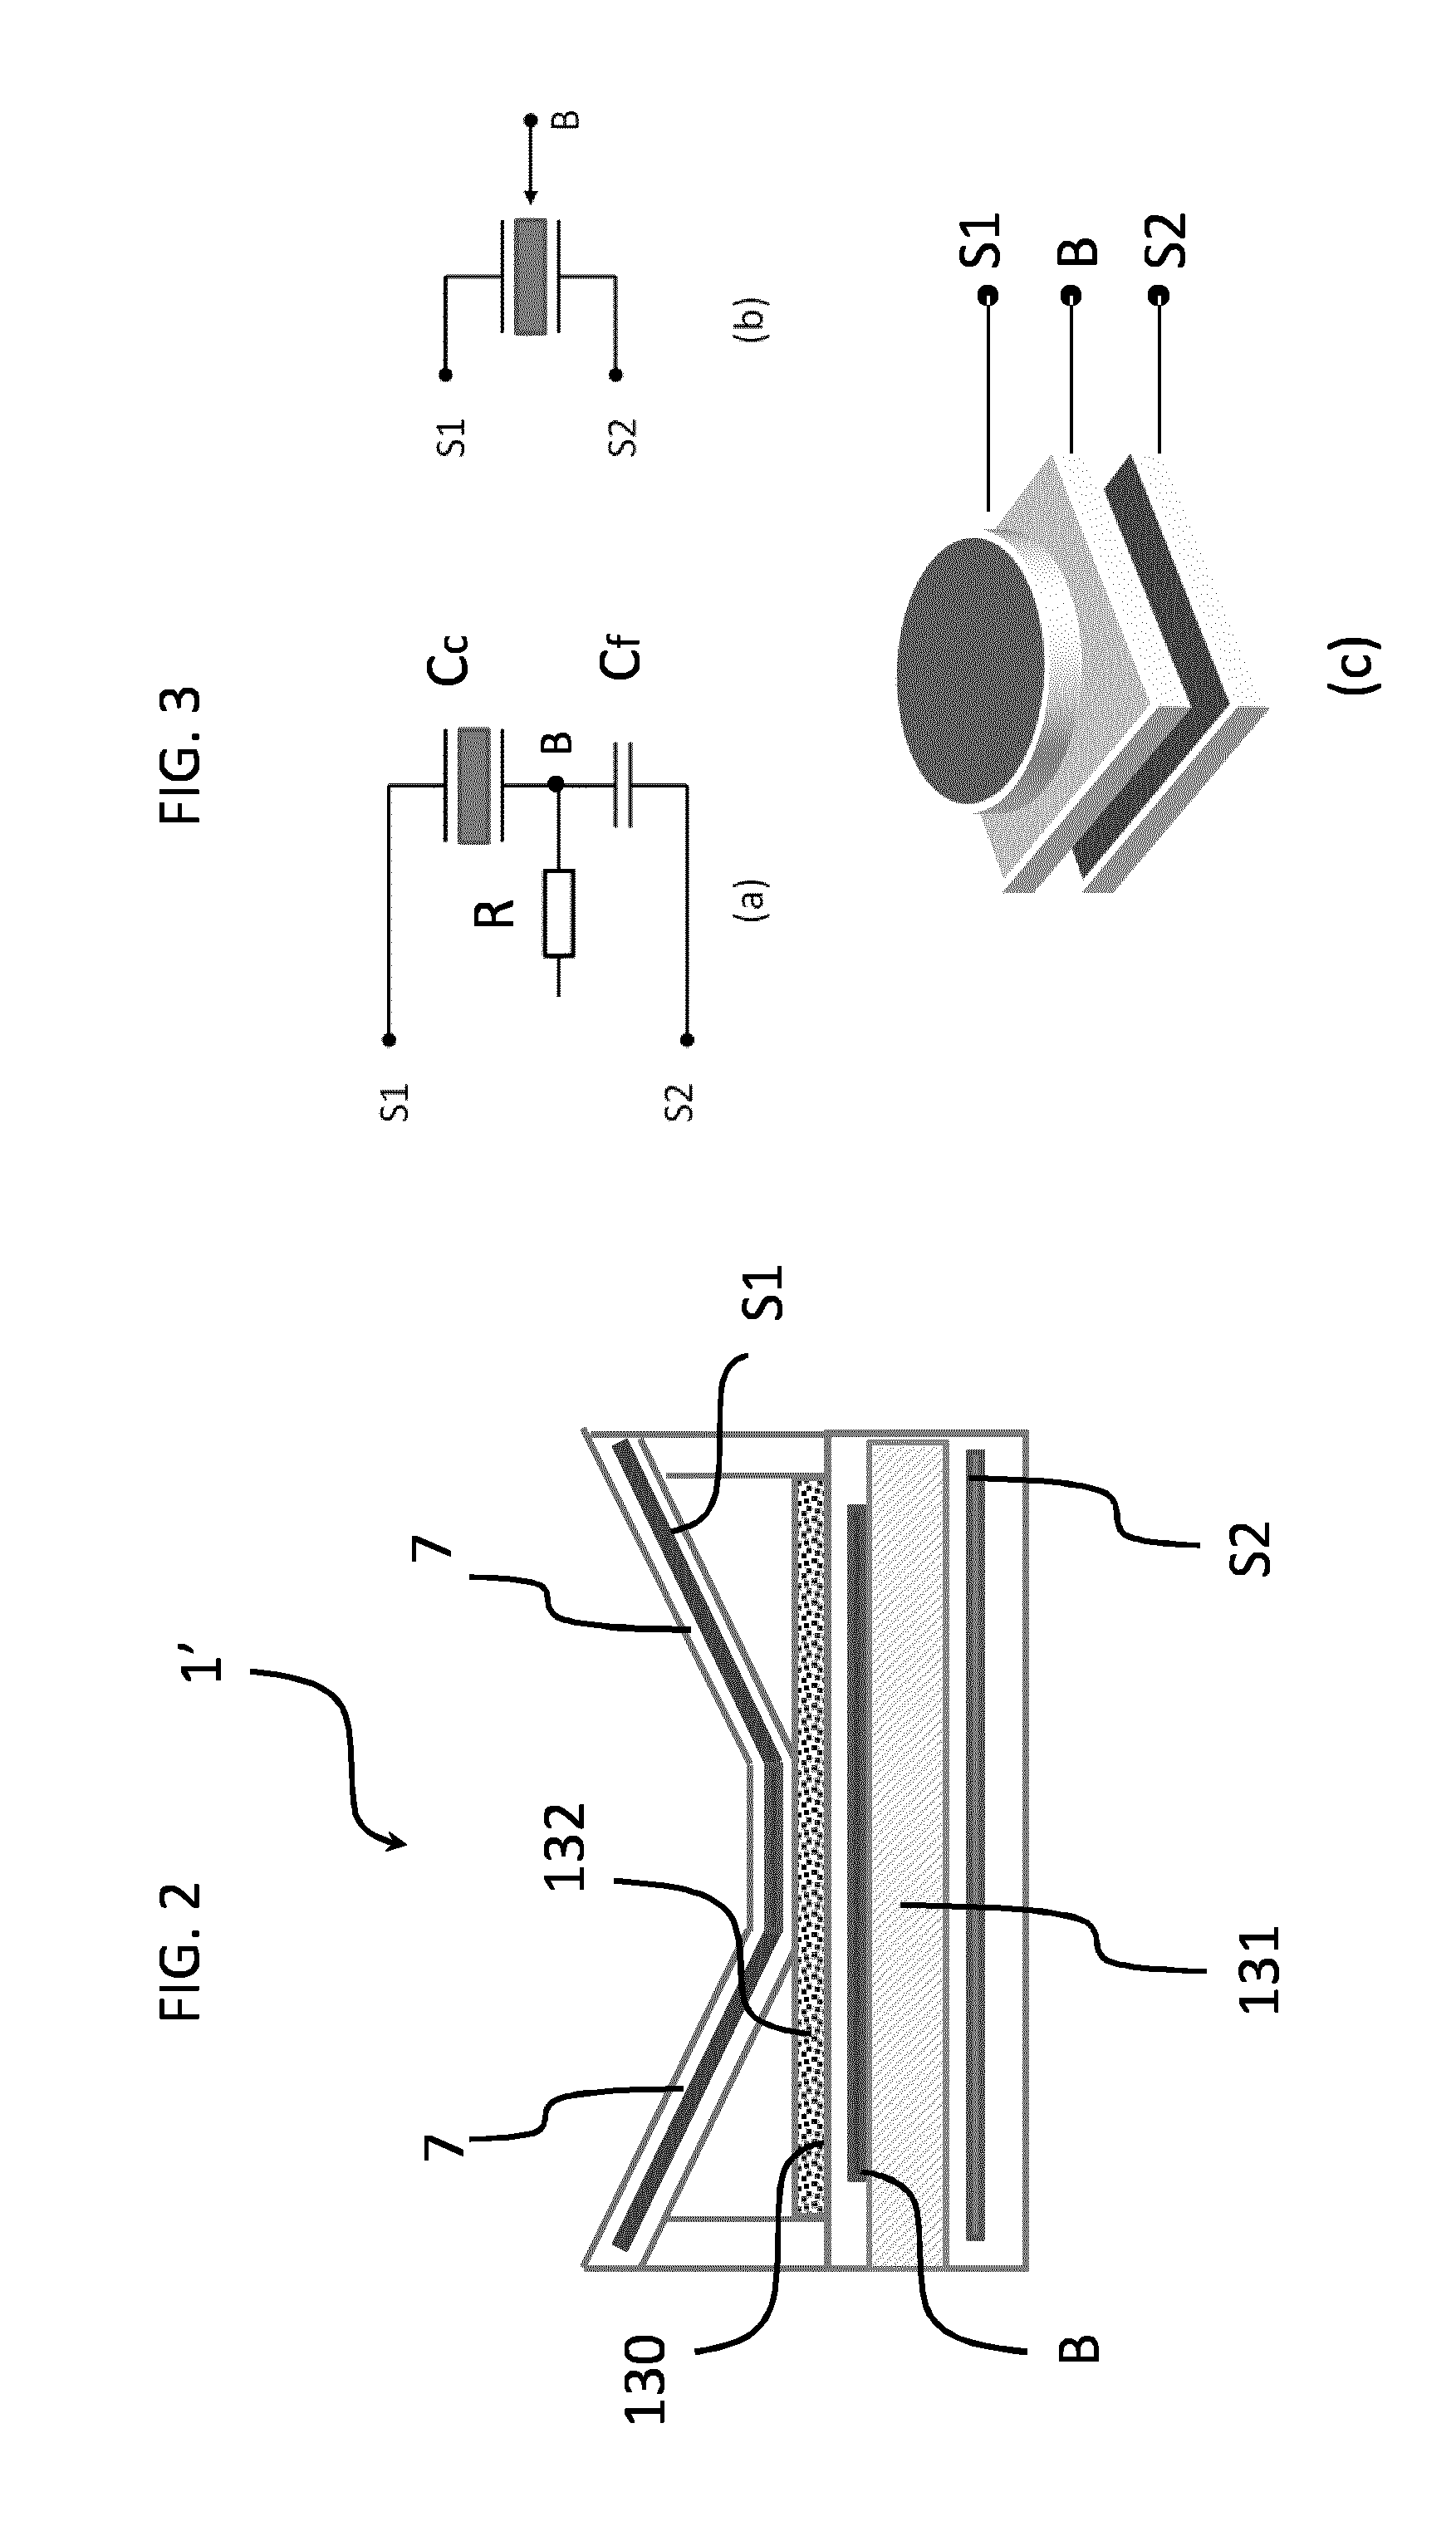 Monolithically integrated three electrode cmut device